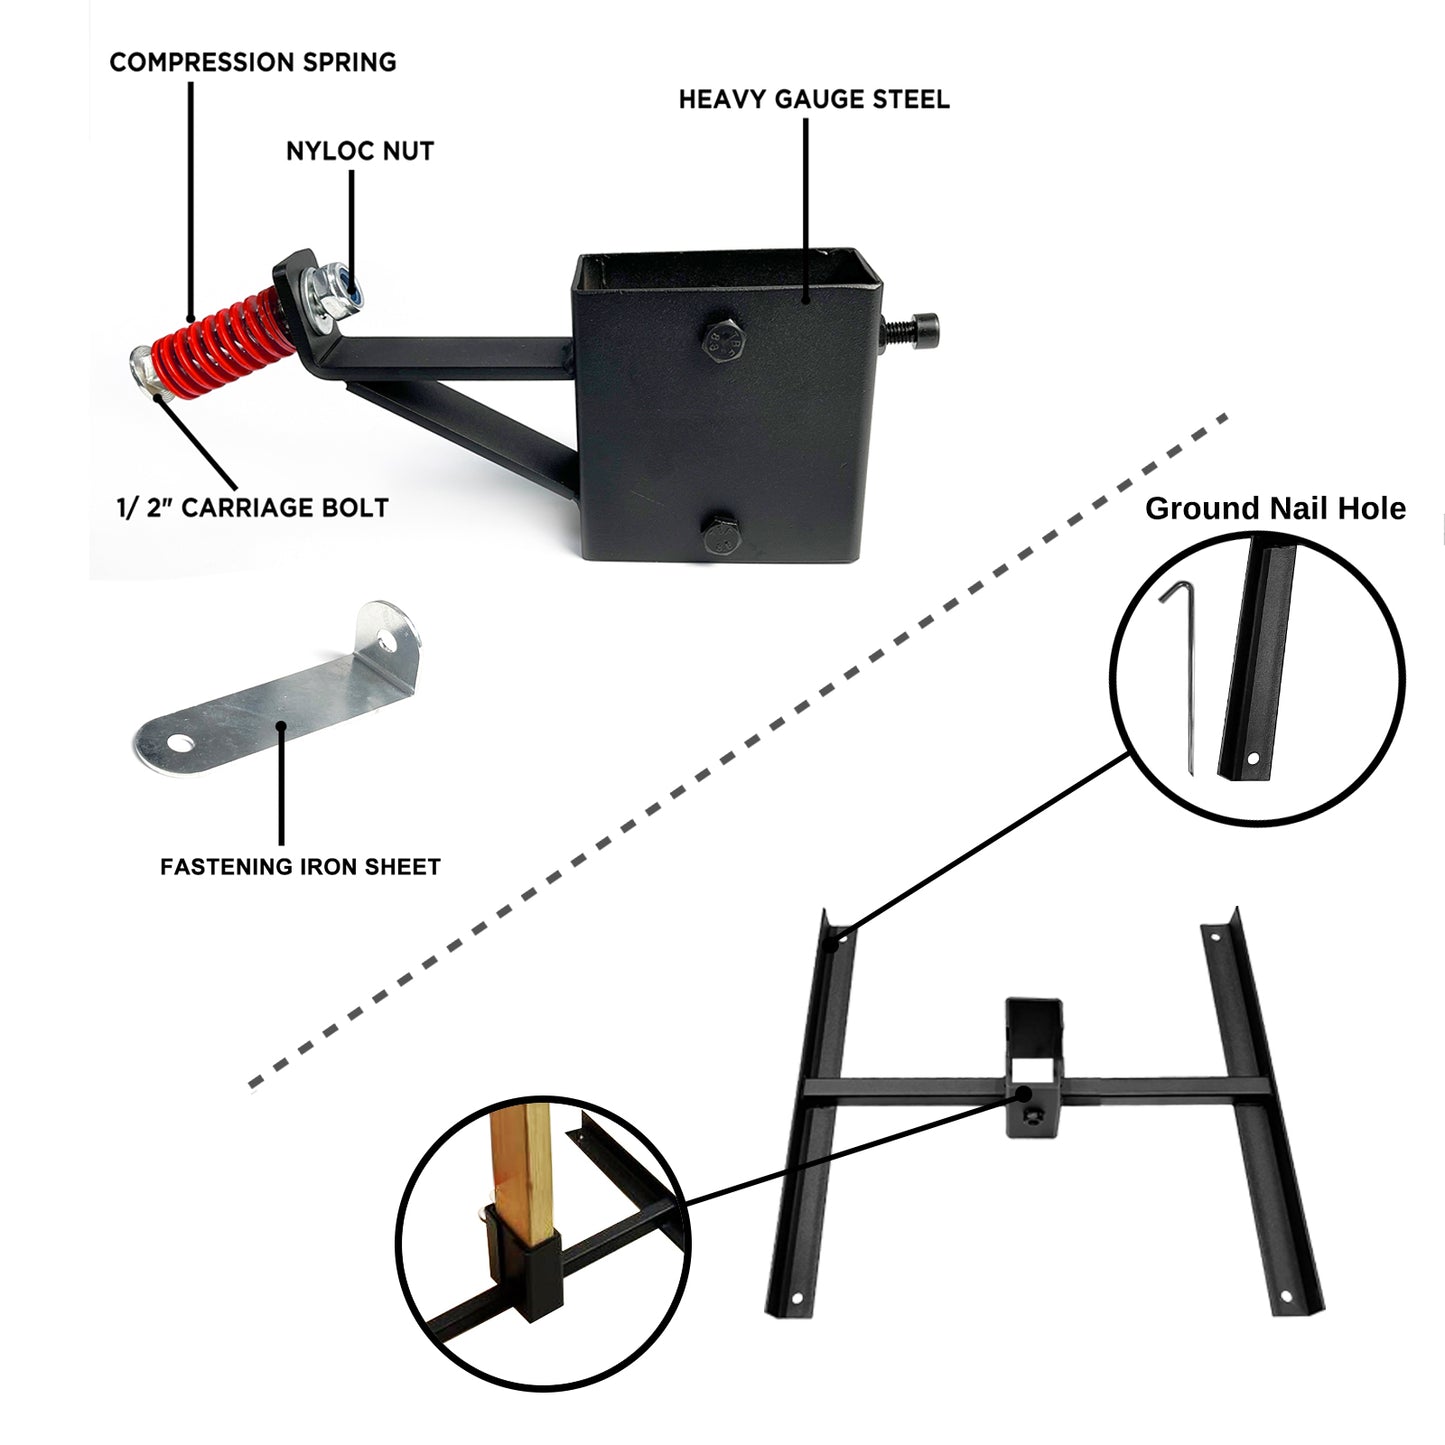 ATFLBOX 3/8" Thick AR500 Steel Target Stand System, 12" x 20" Hostage Reactive Shooting Target with 2x4 Target Stand Kit